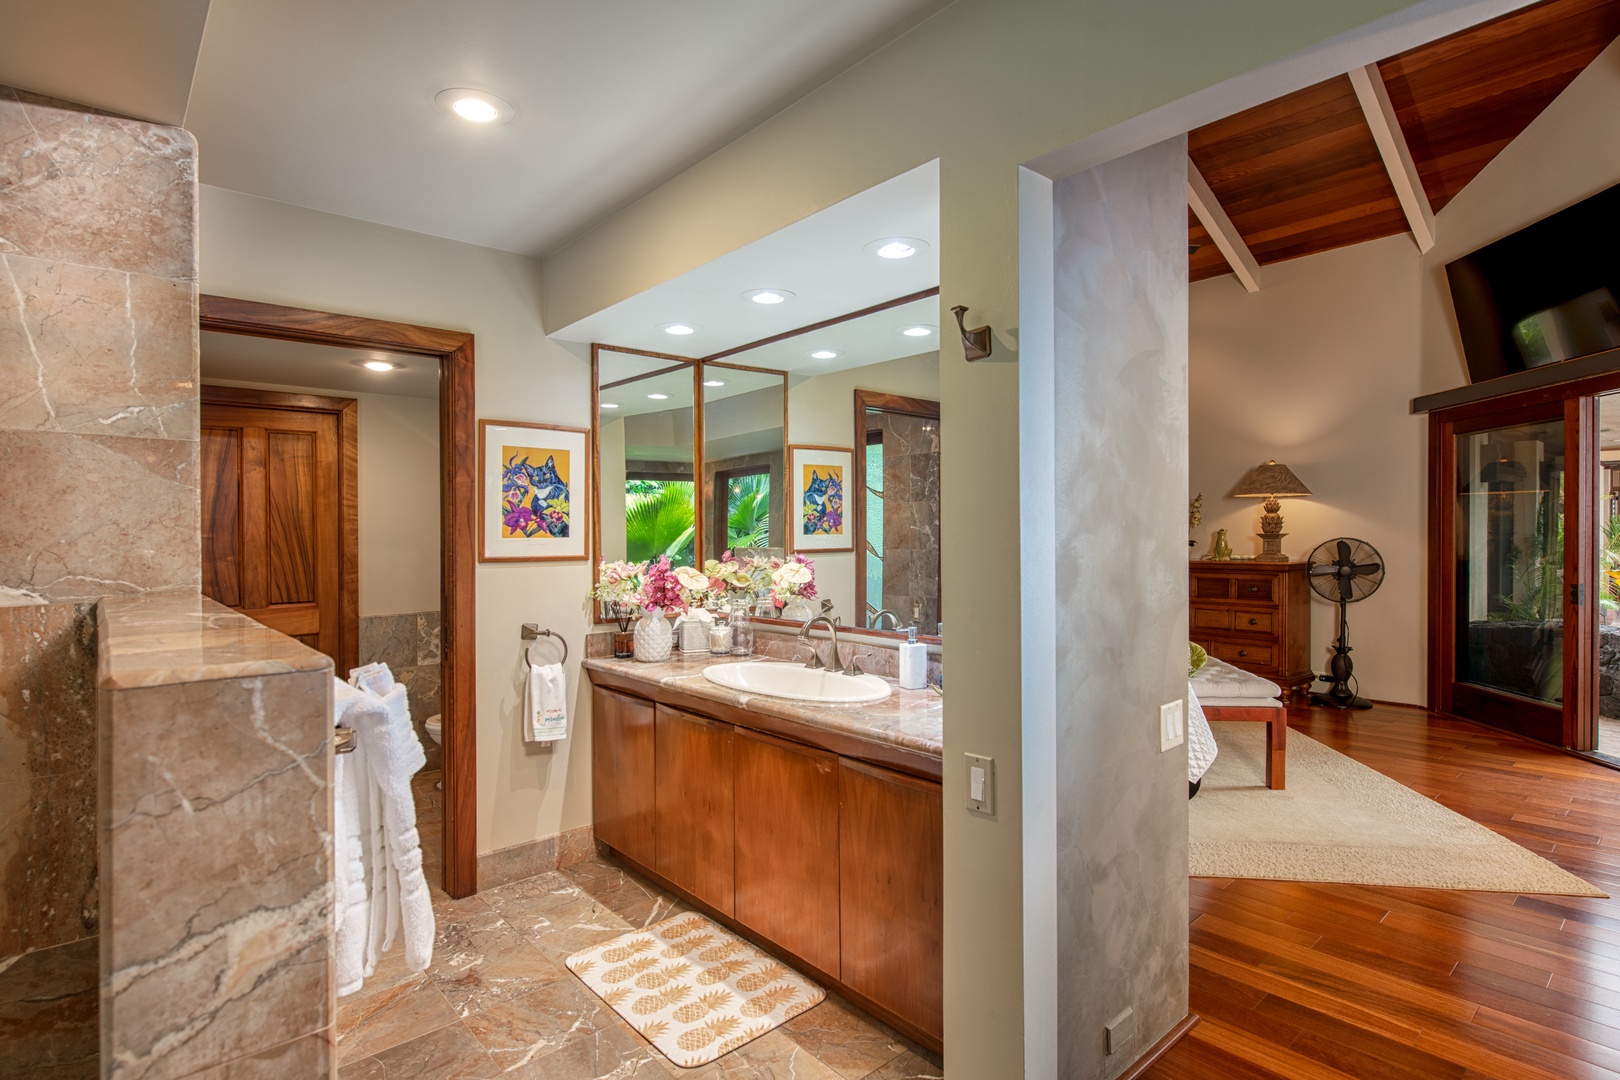 Kailua Kona Vacation Rentals, Hale Wailele** - Guest ensuite with natural light and storage